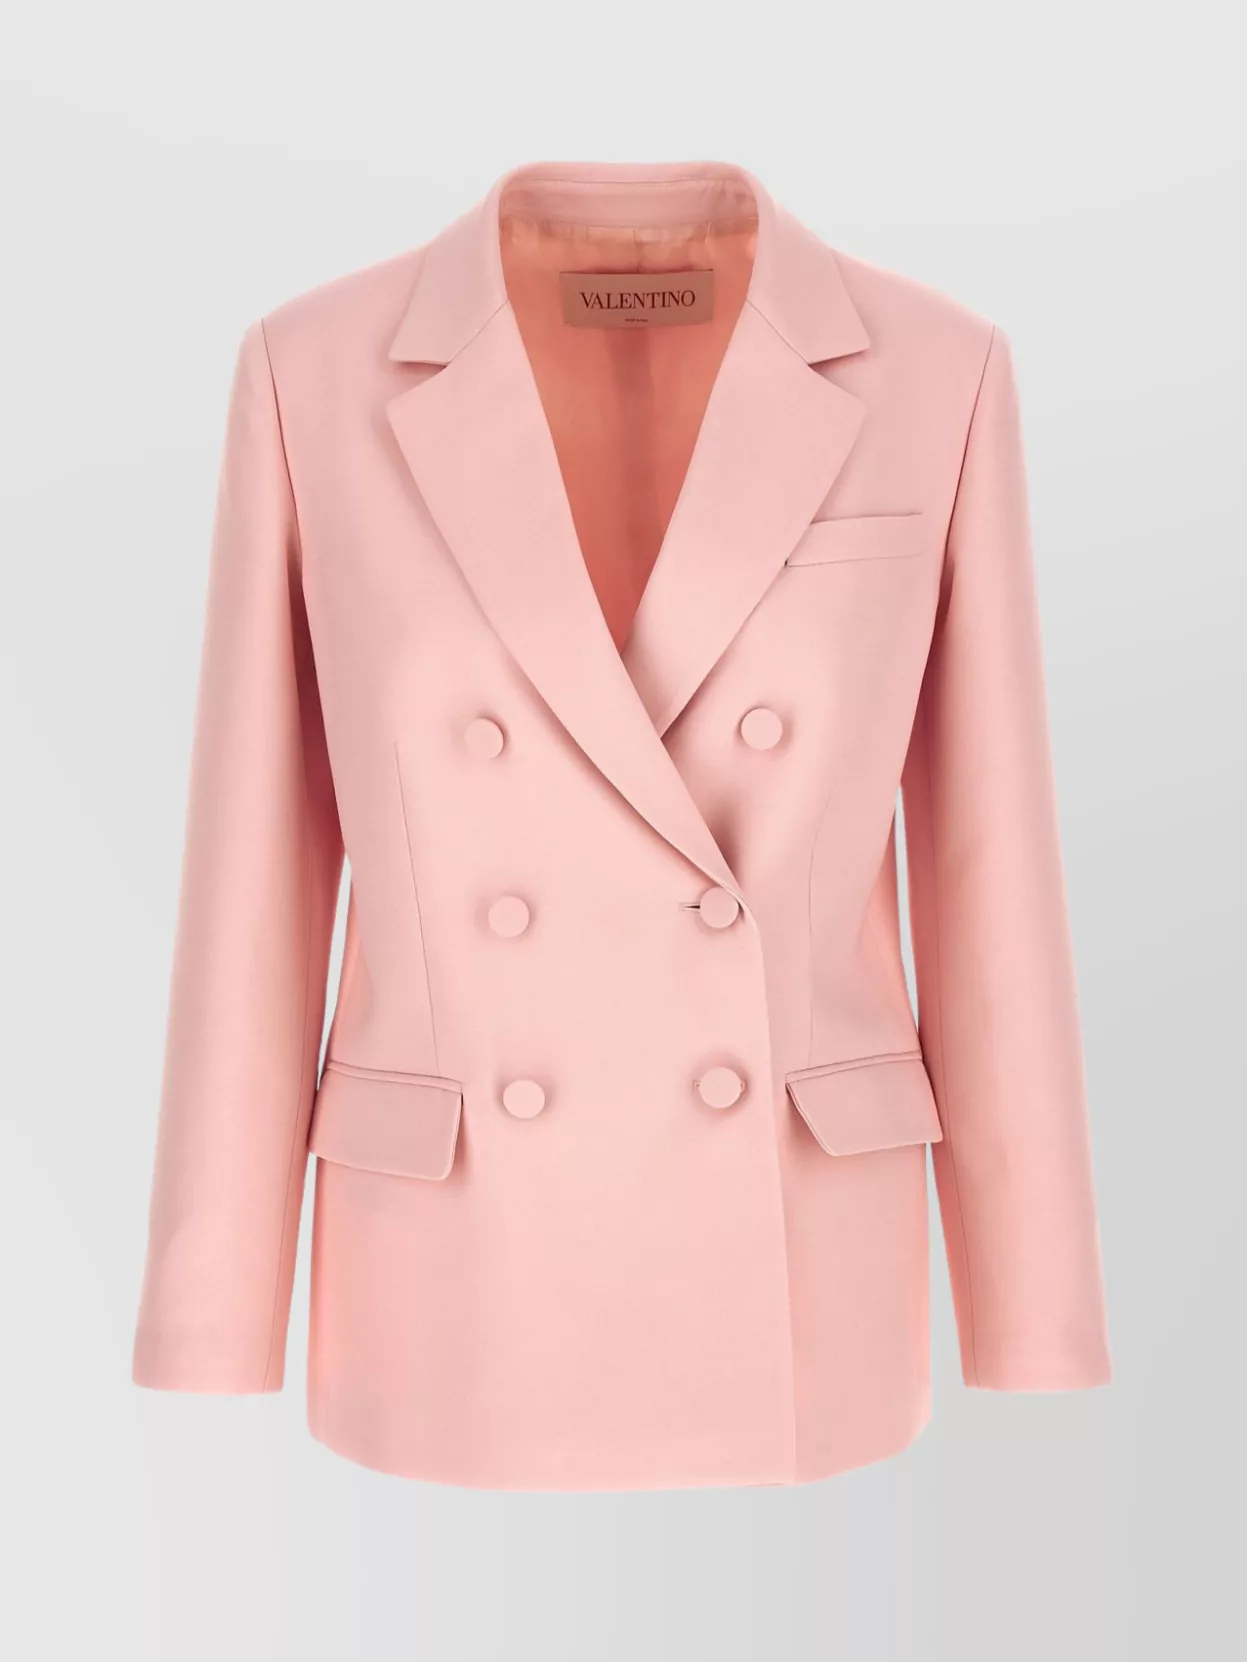 Valentino Double-breasted Blazer Featuring Structured Shoulders In Pink